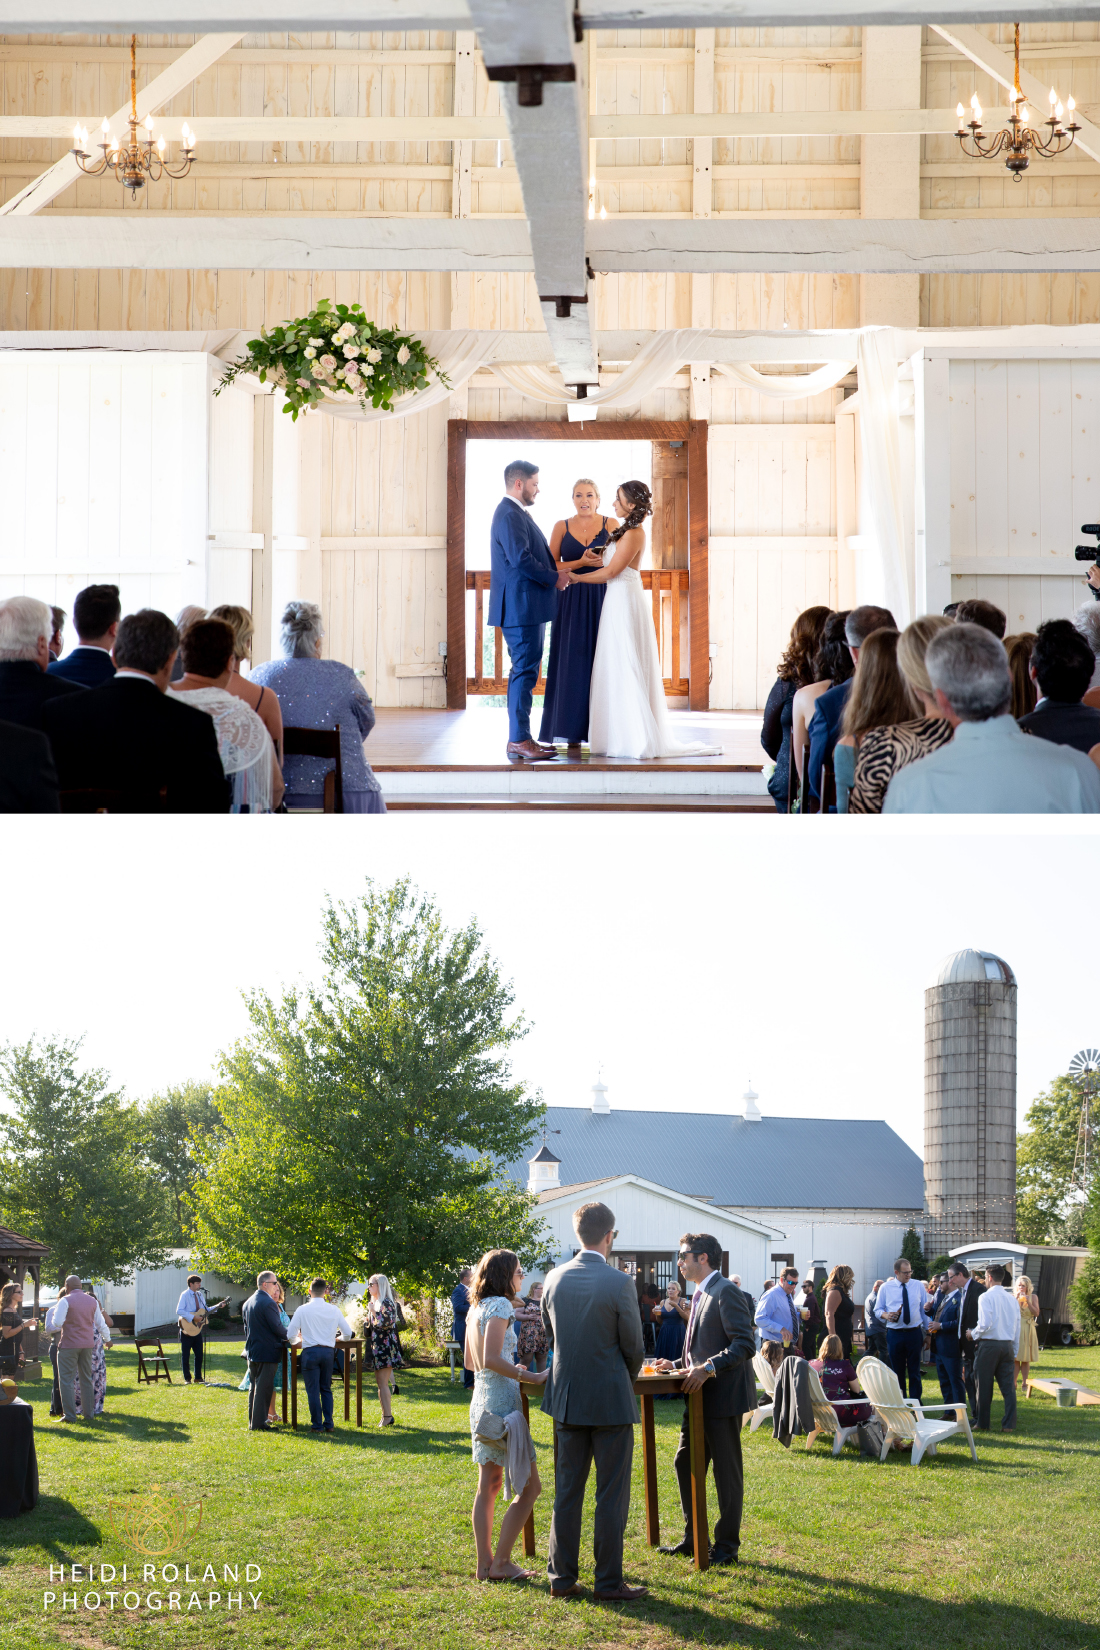 Stoltzfus Homestead wedding ceremony and cocktail hour on lawn